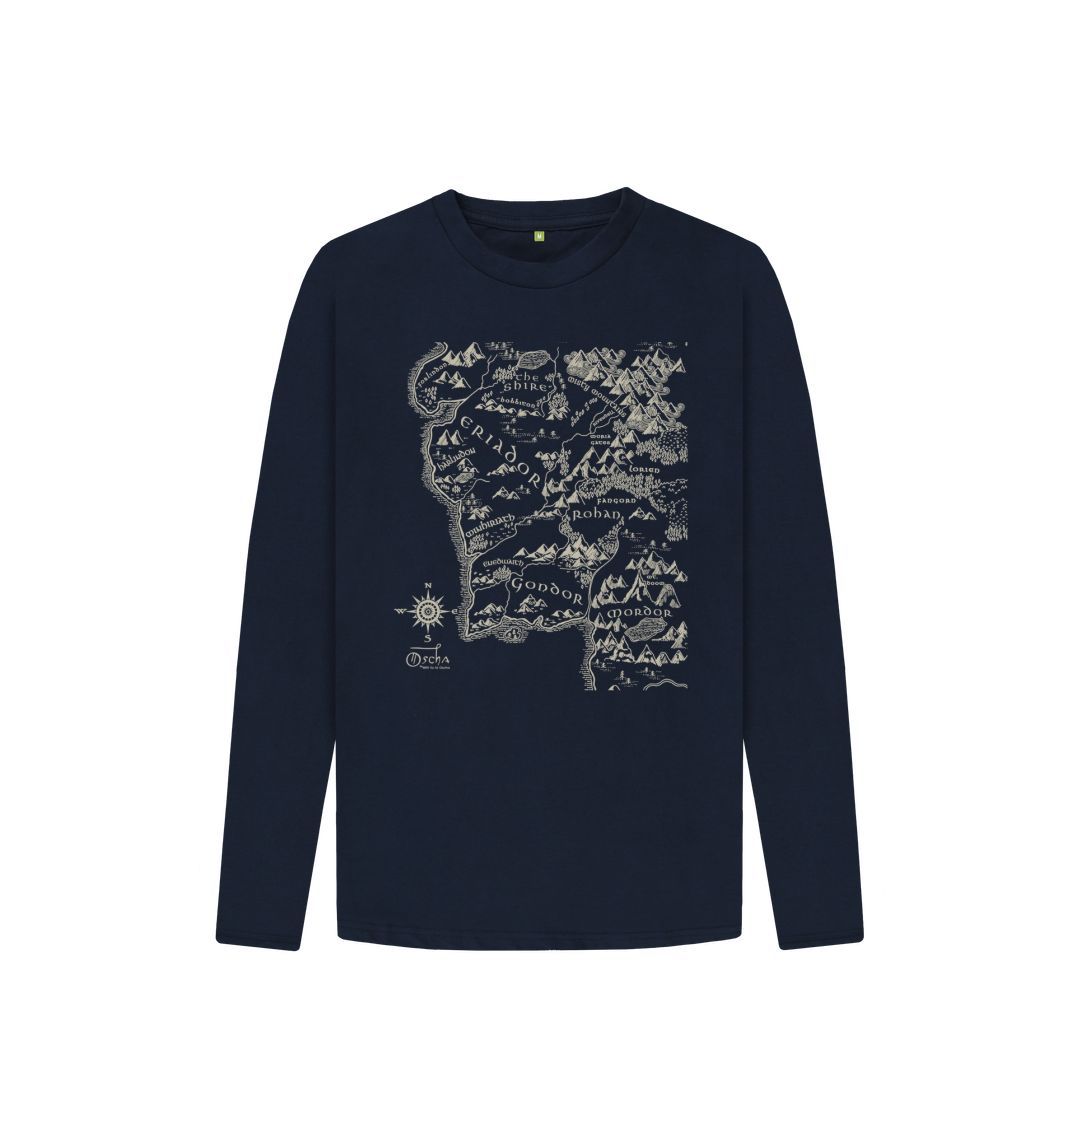 Navy Blue Realm of MIDDLE-EARTH\u2122 Kids Long Sleeved T-shirt